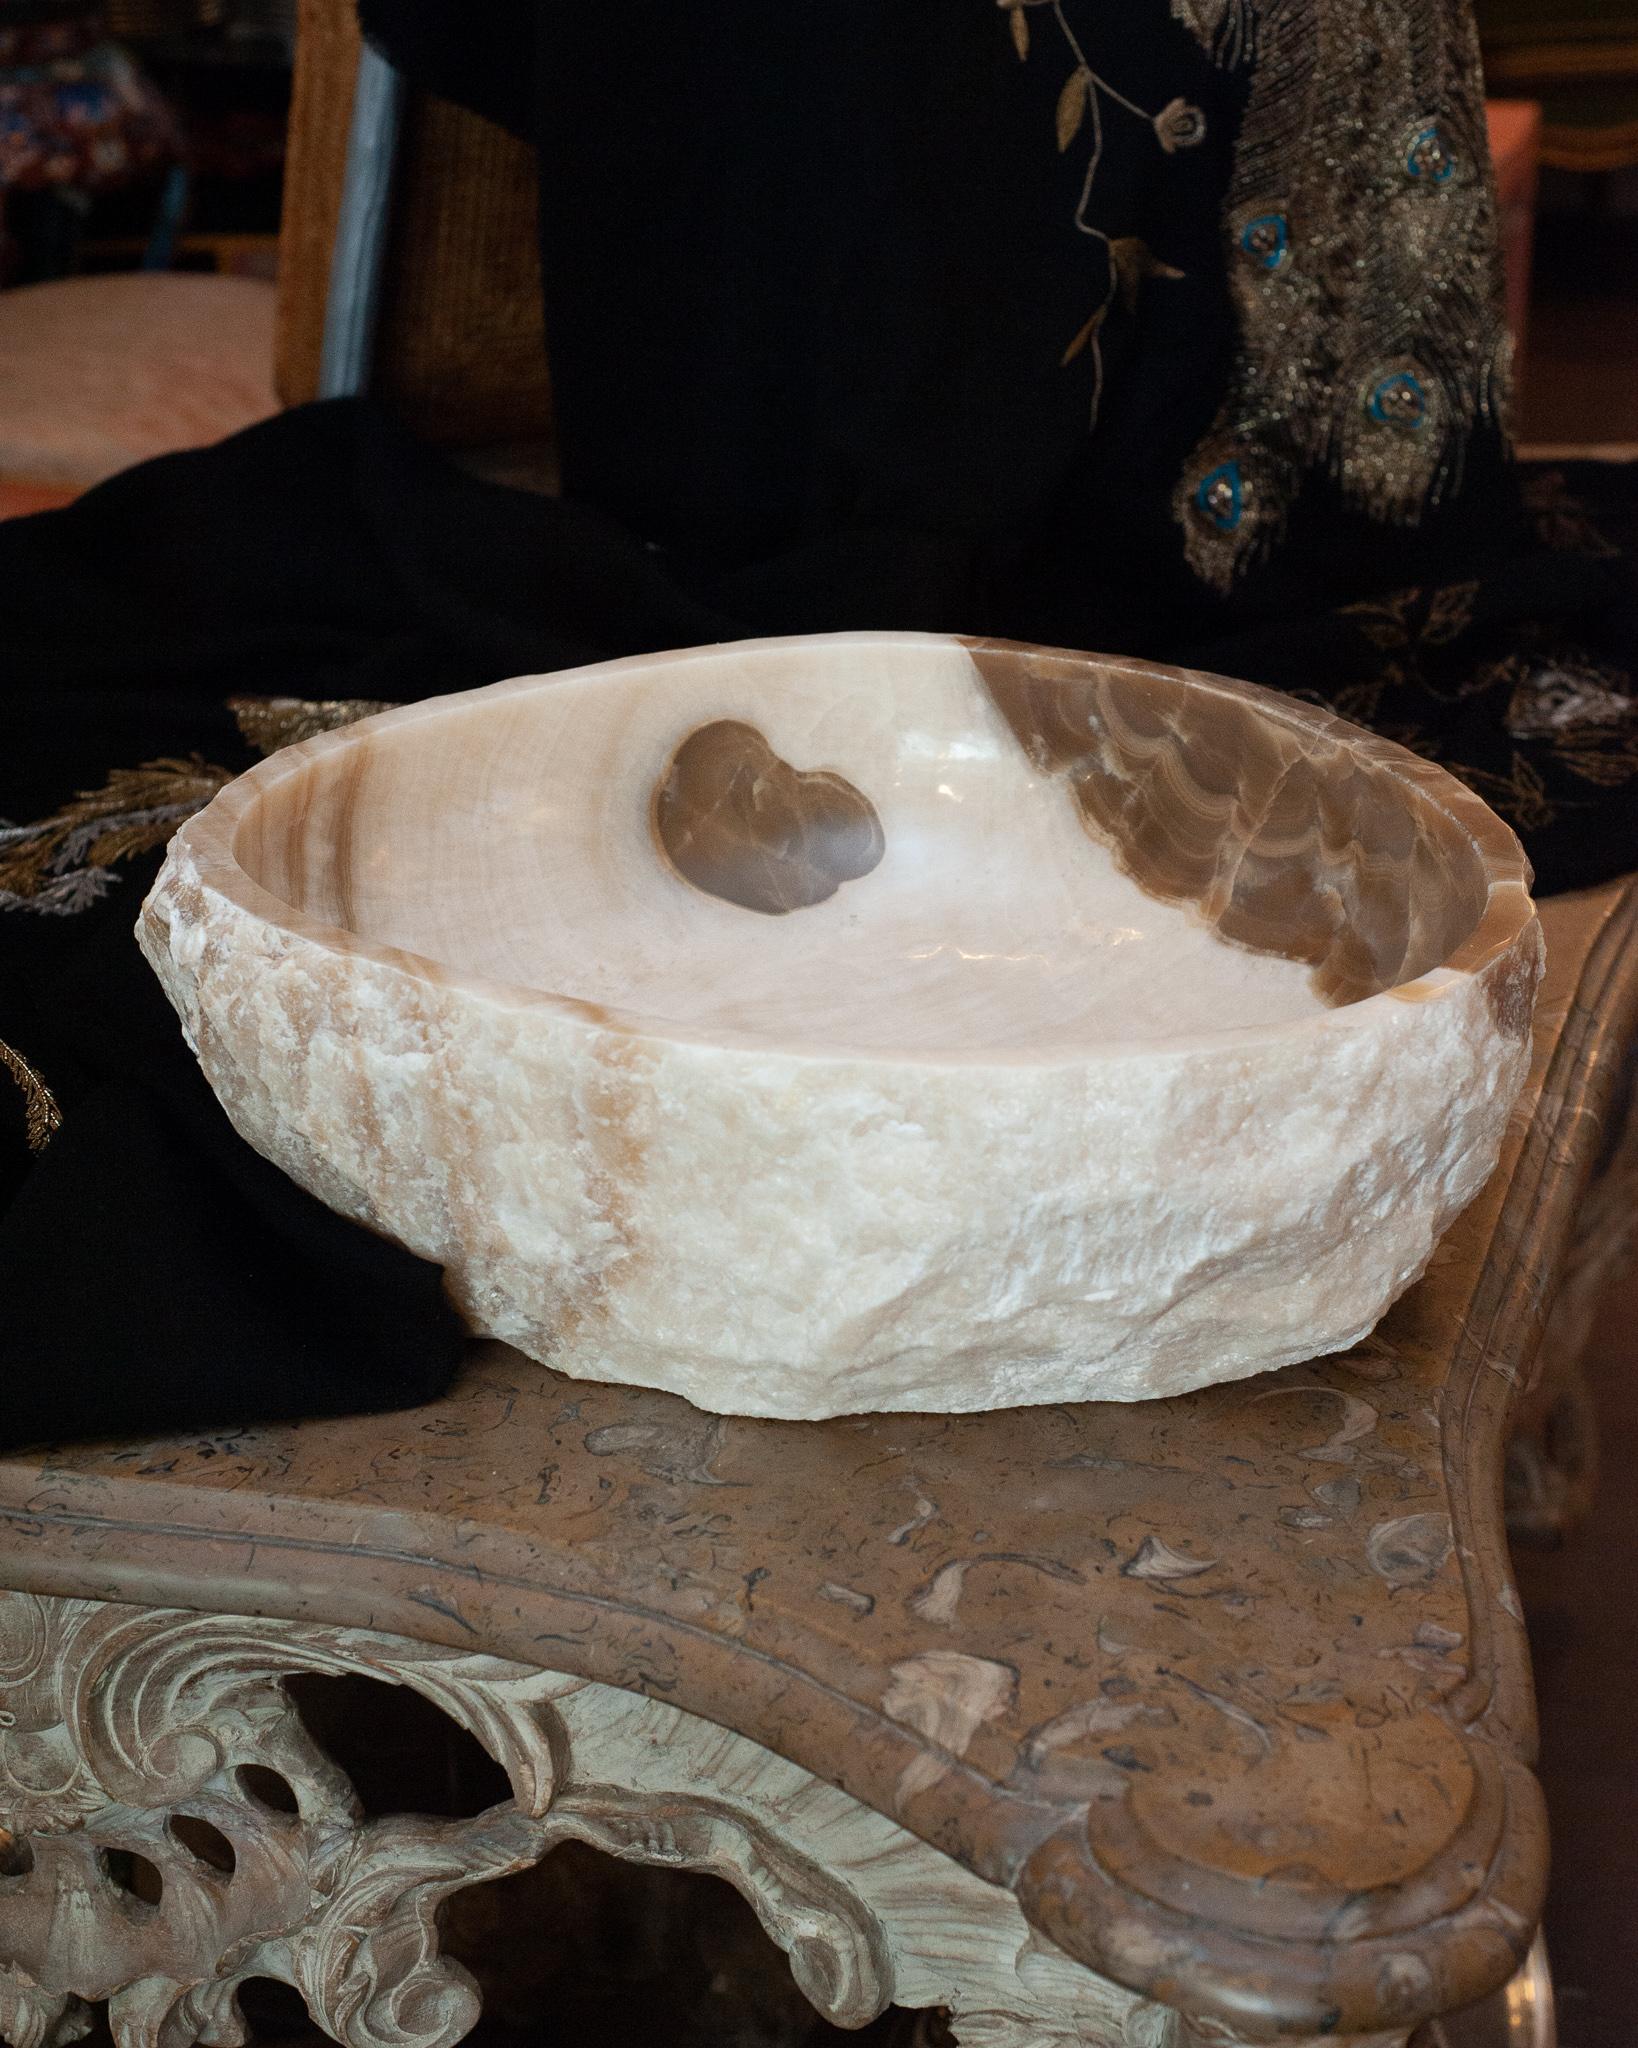 Invite the healing energy of onyx into your home with an exceptional massive mineral bowl. This raw edge stone bowl is banded with white and tan with a highly polished interior.